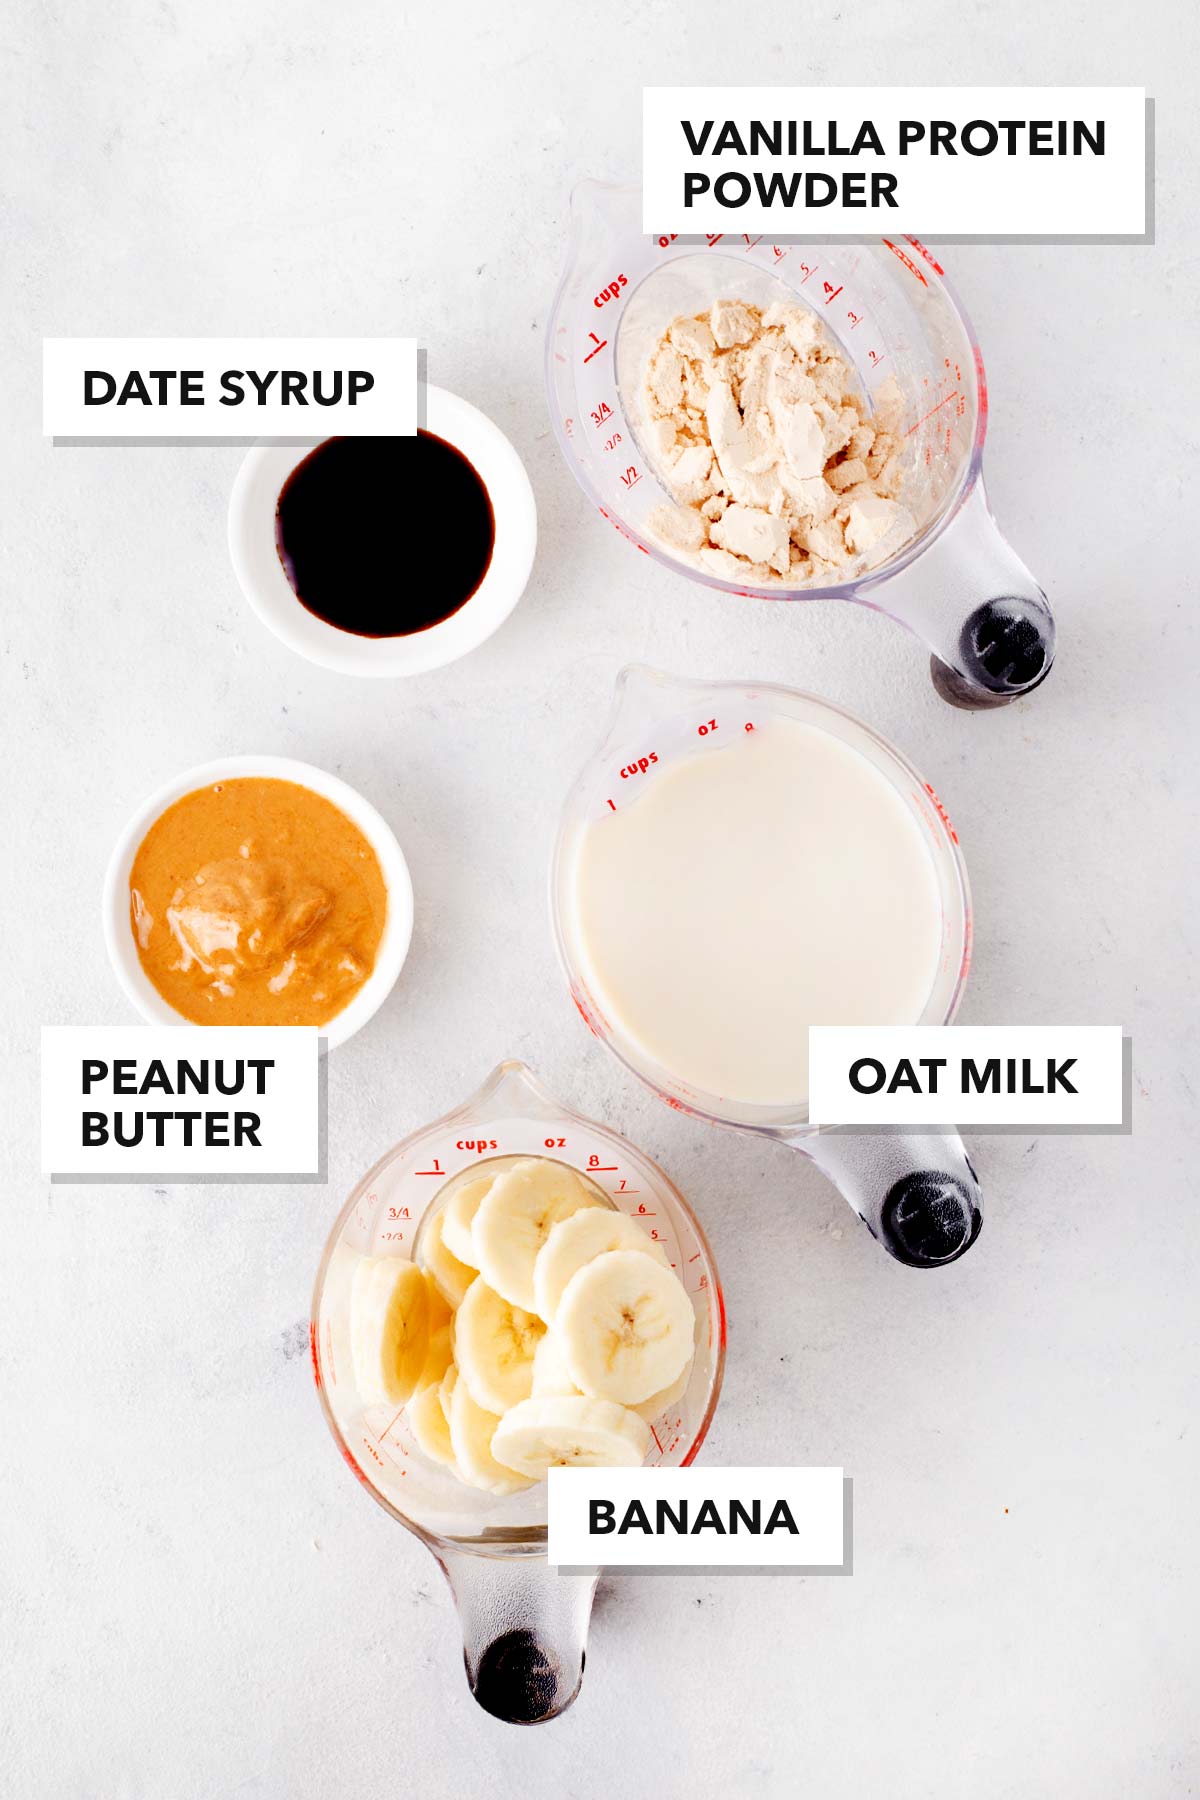 Ingredients for a peanut butter banana protein shake.